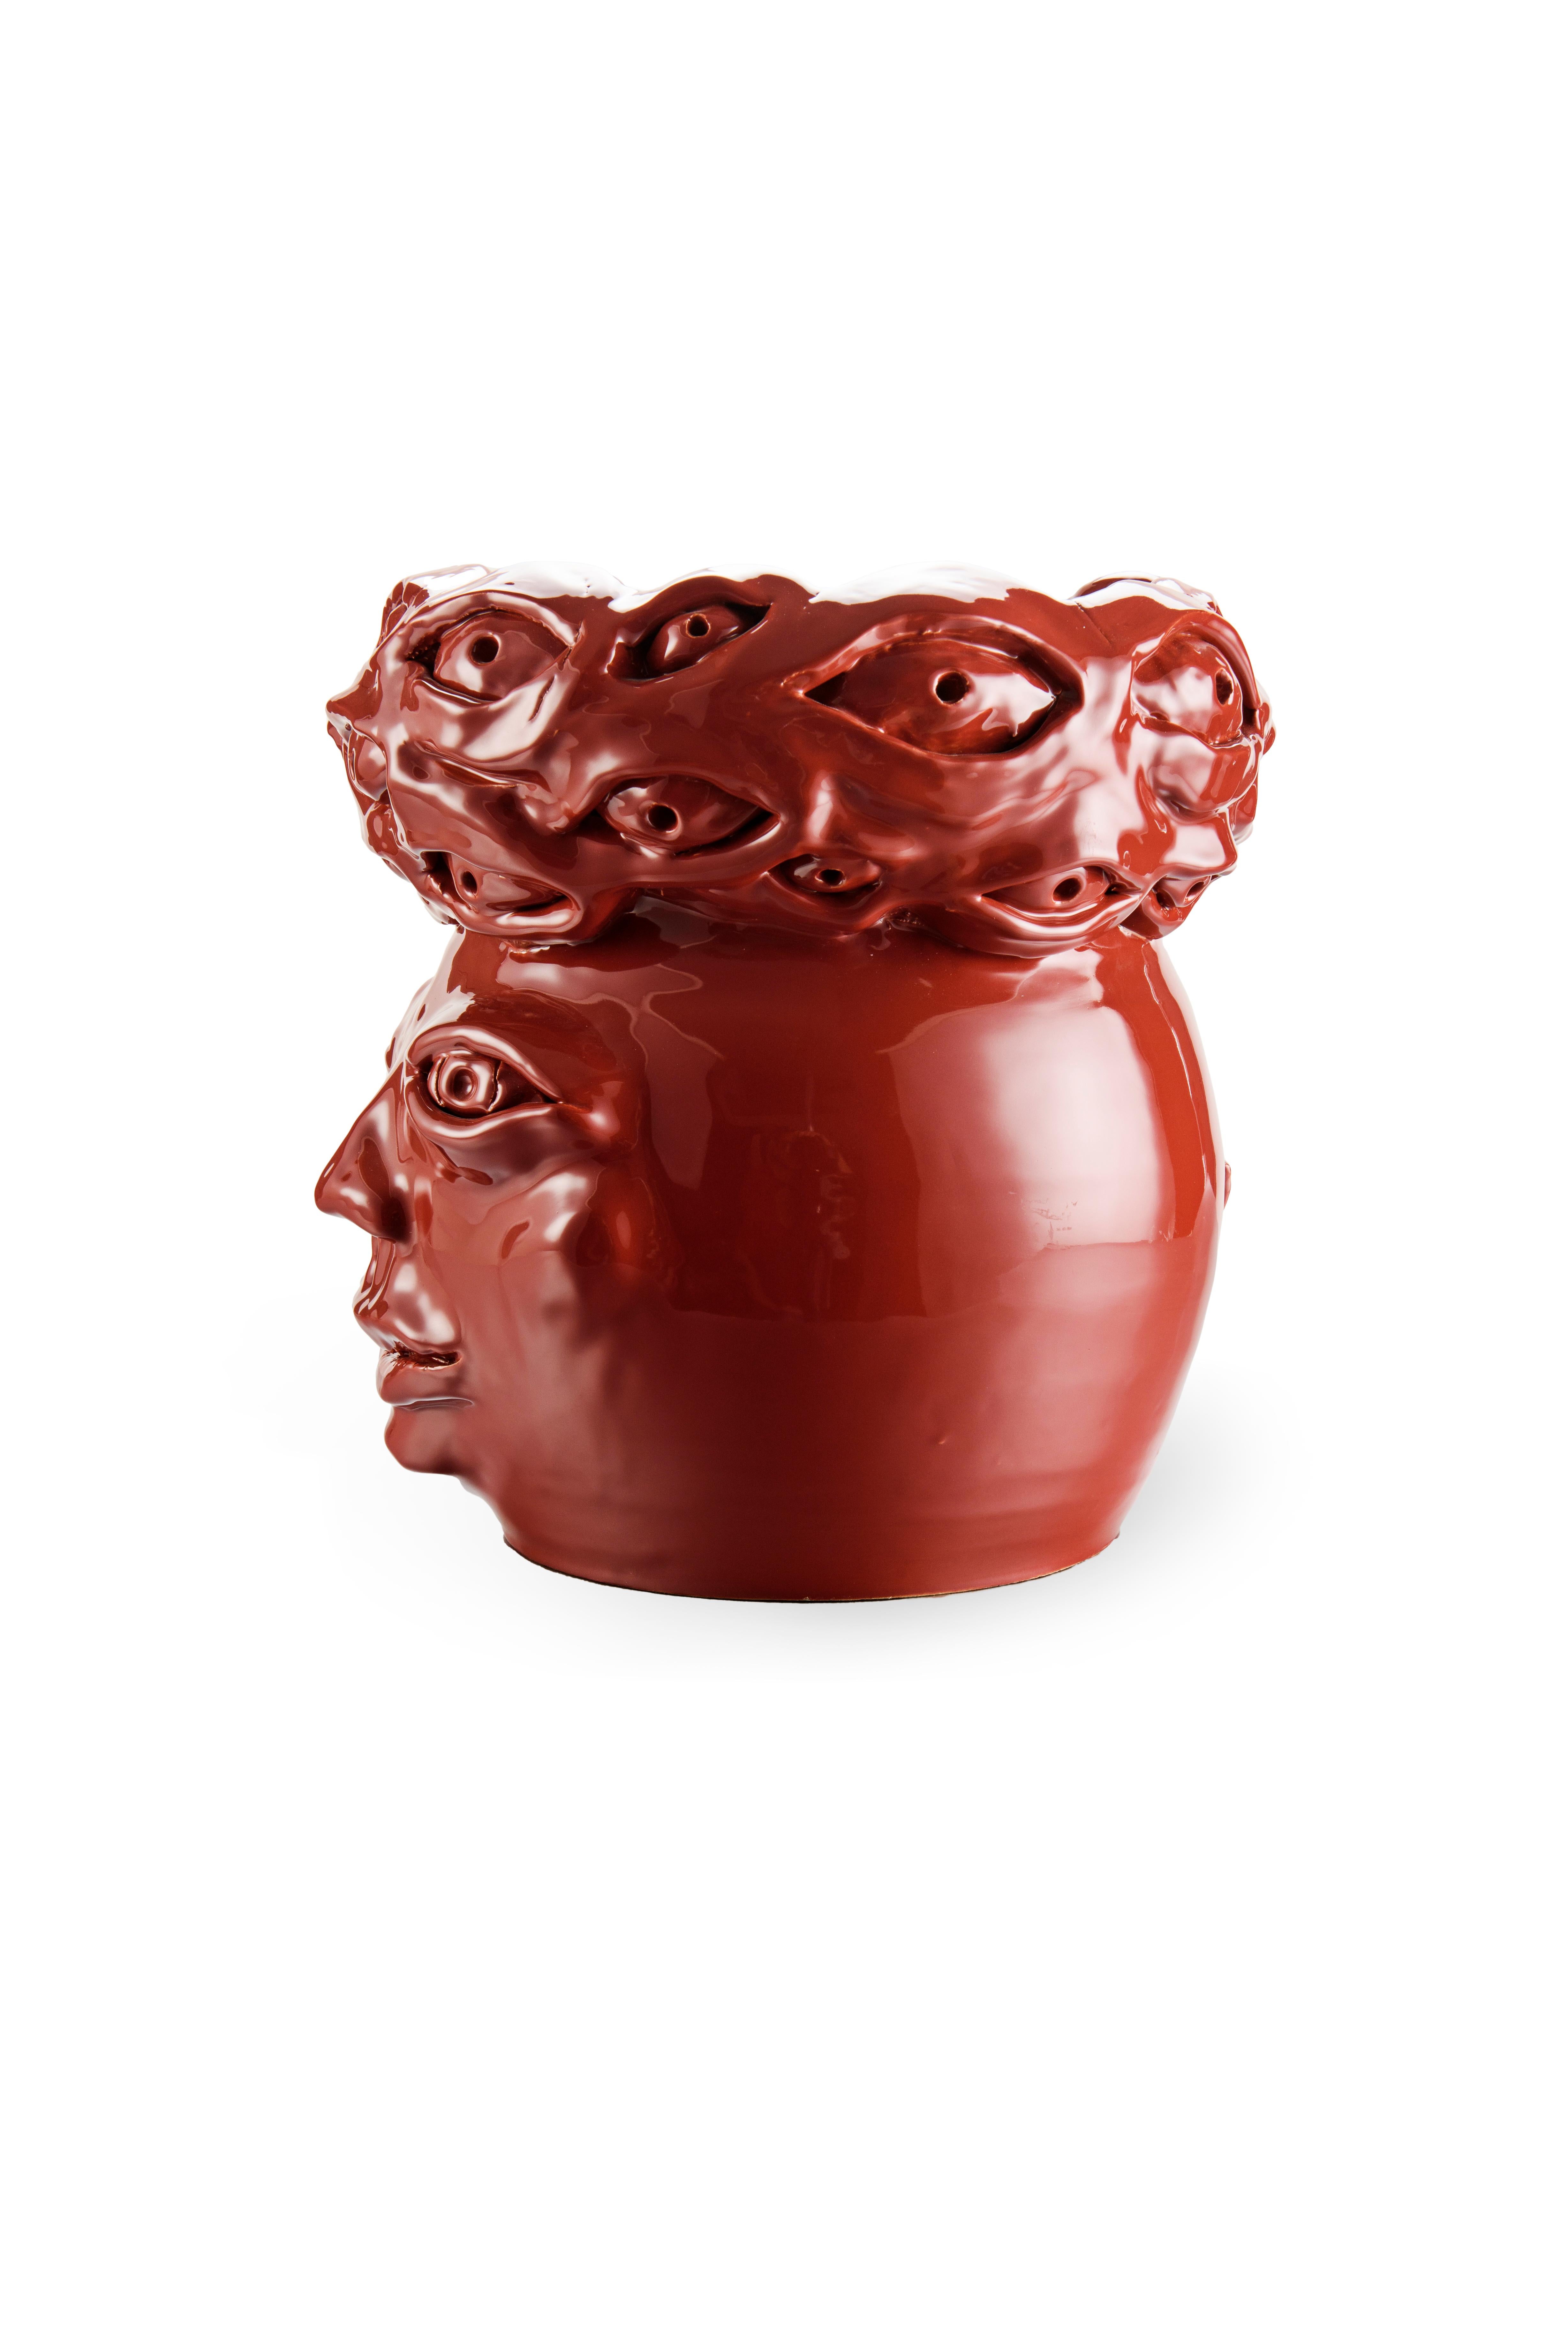 Italian Freaklab vase made entirely by hand in ceramic, warm red color For Sale